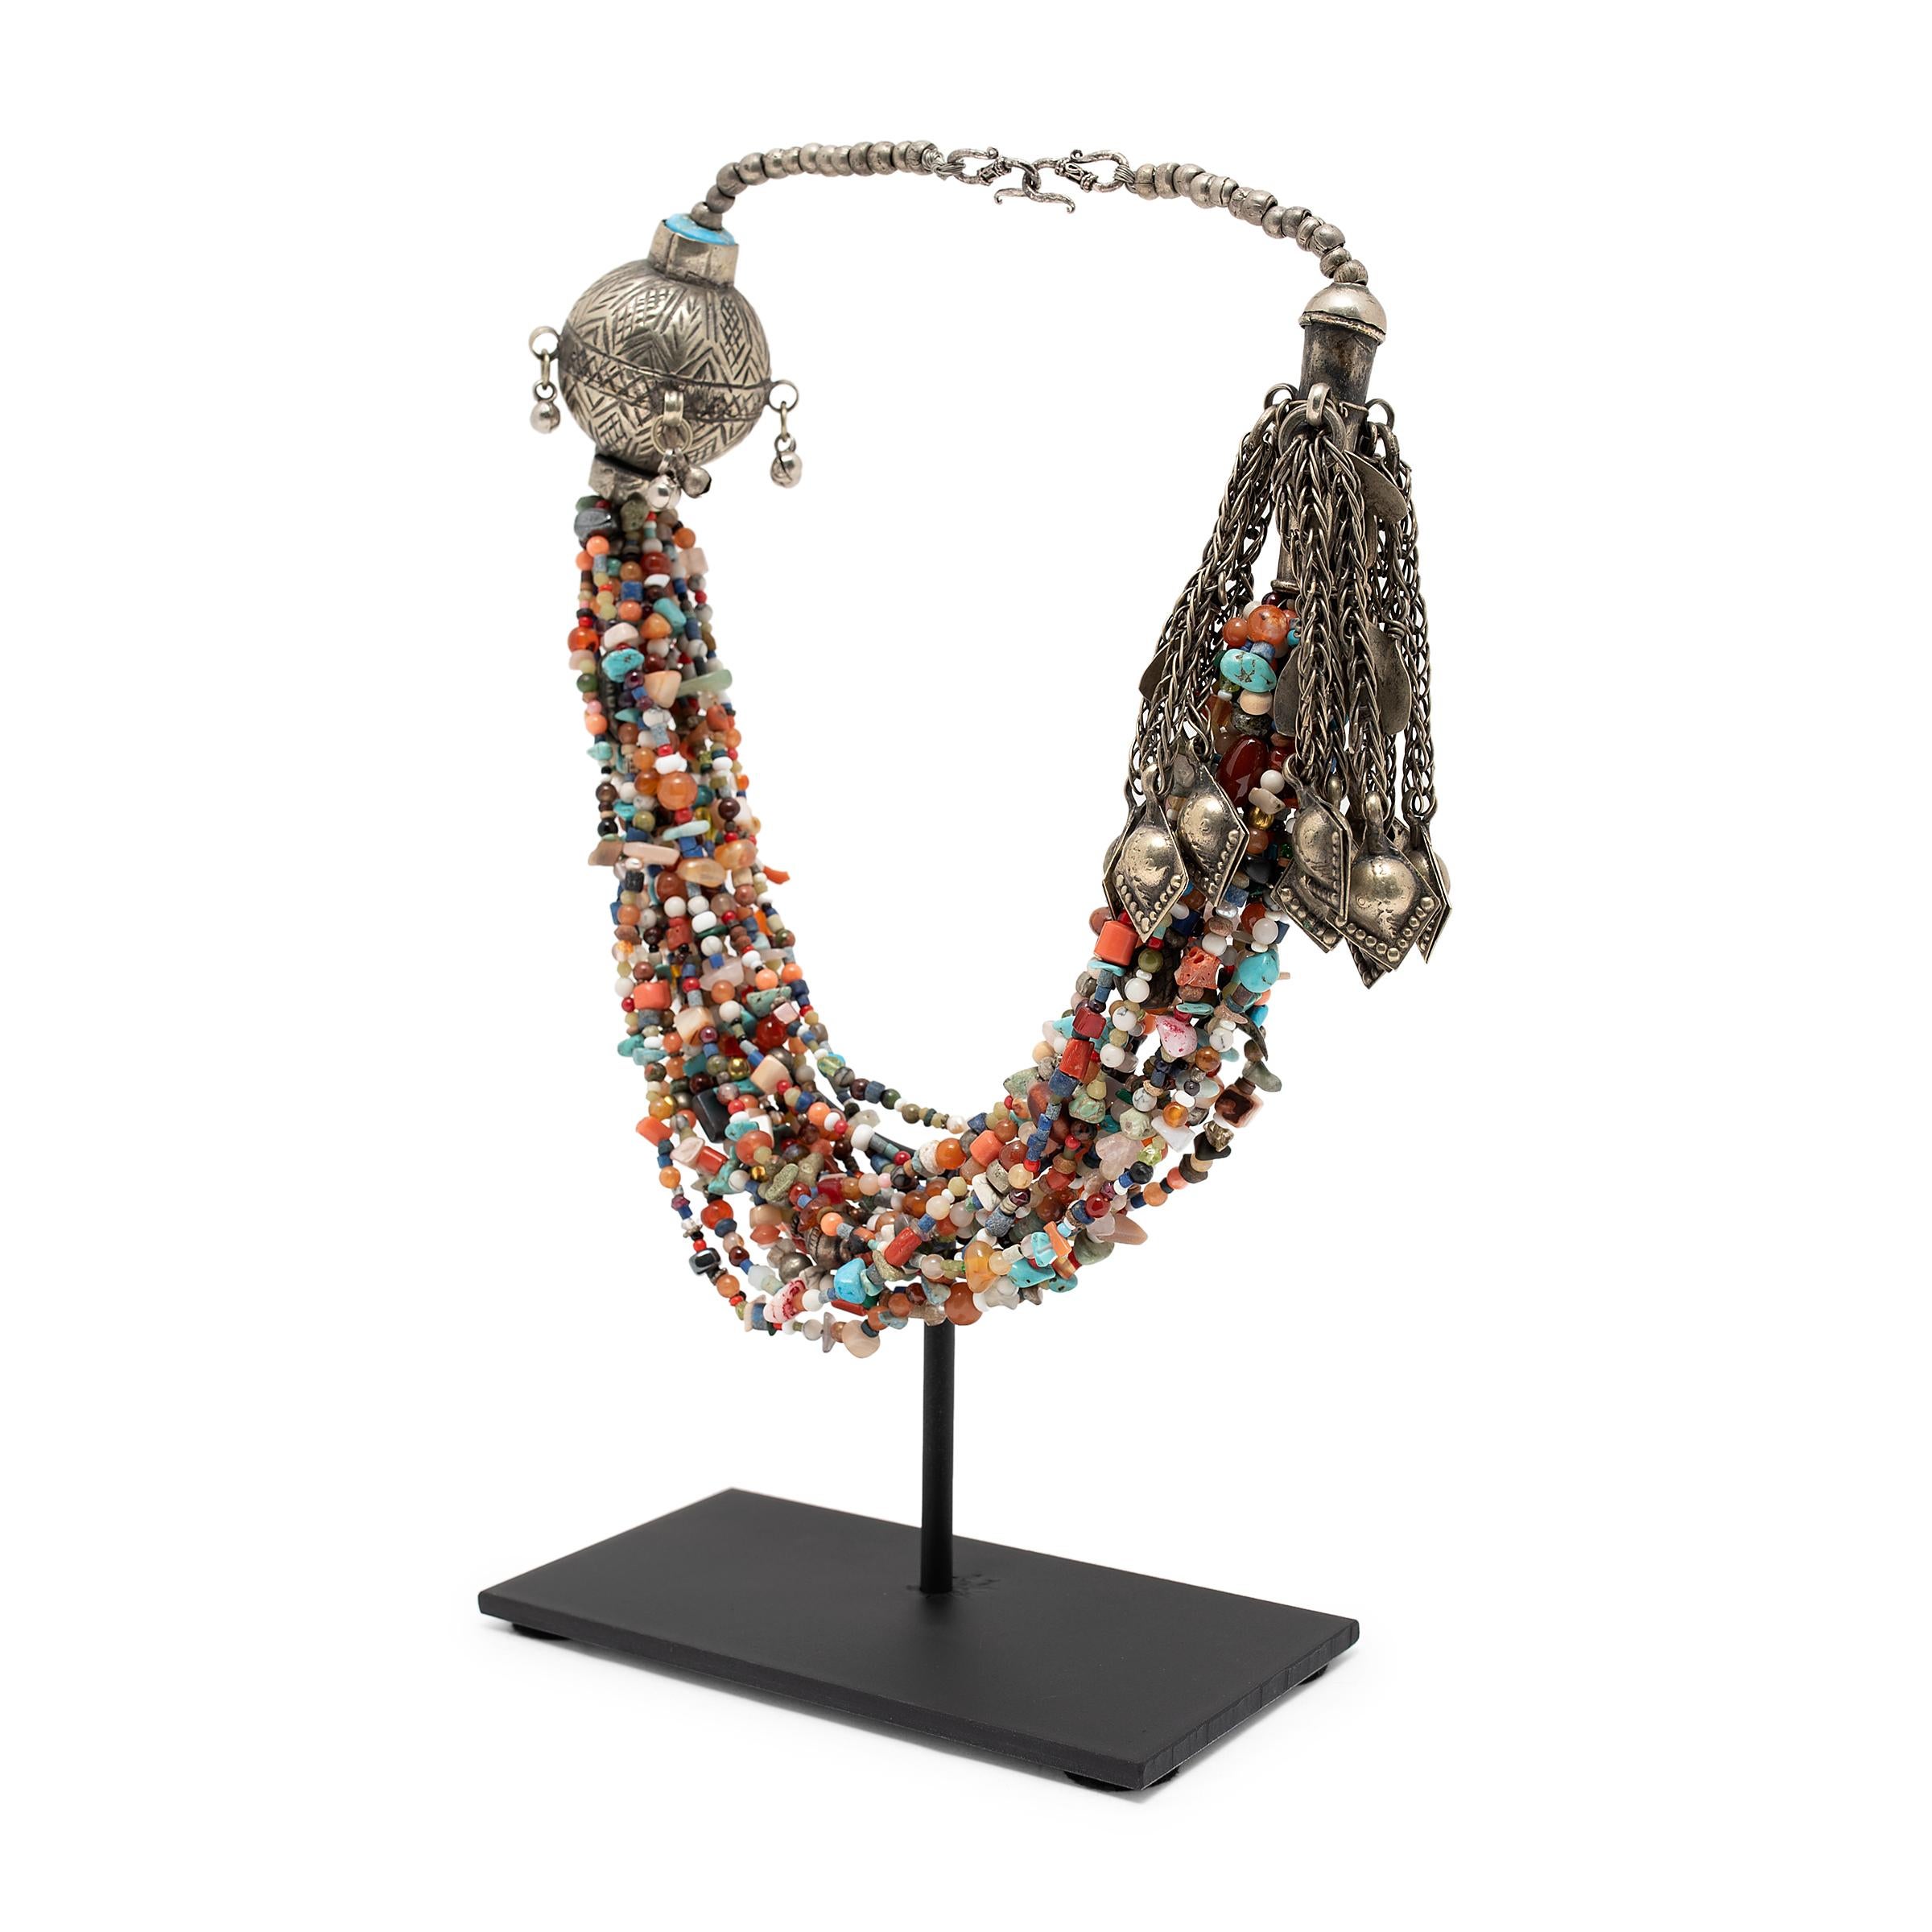 This fantastic antique Tibetan necklace is beautifully crafted of silver metalwork and draped beads of various shapes and sizes. The colorful beads include carnelian, turquoise, coral, glass, silver and other precious stones. The many strands of